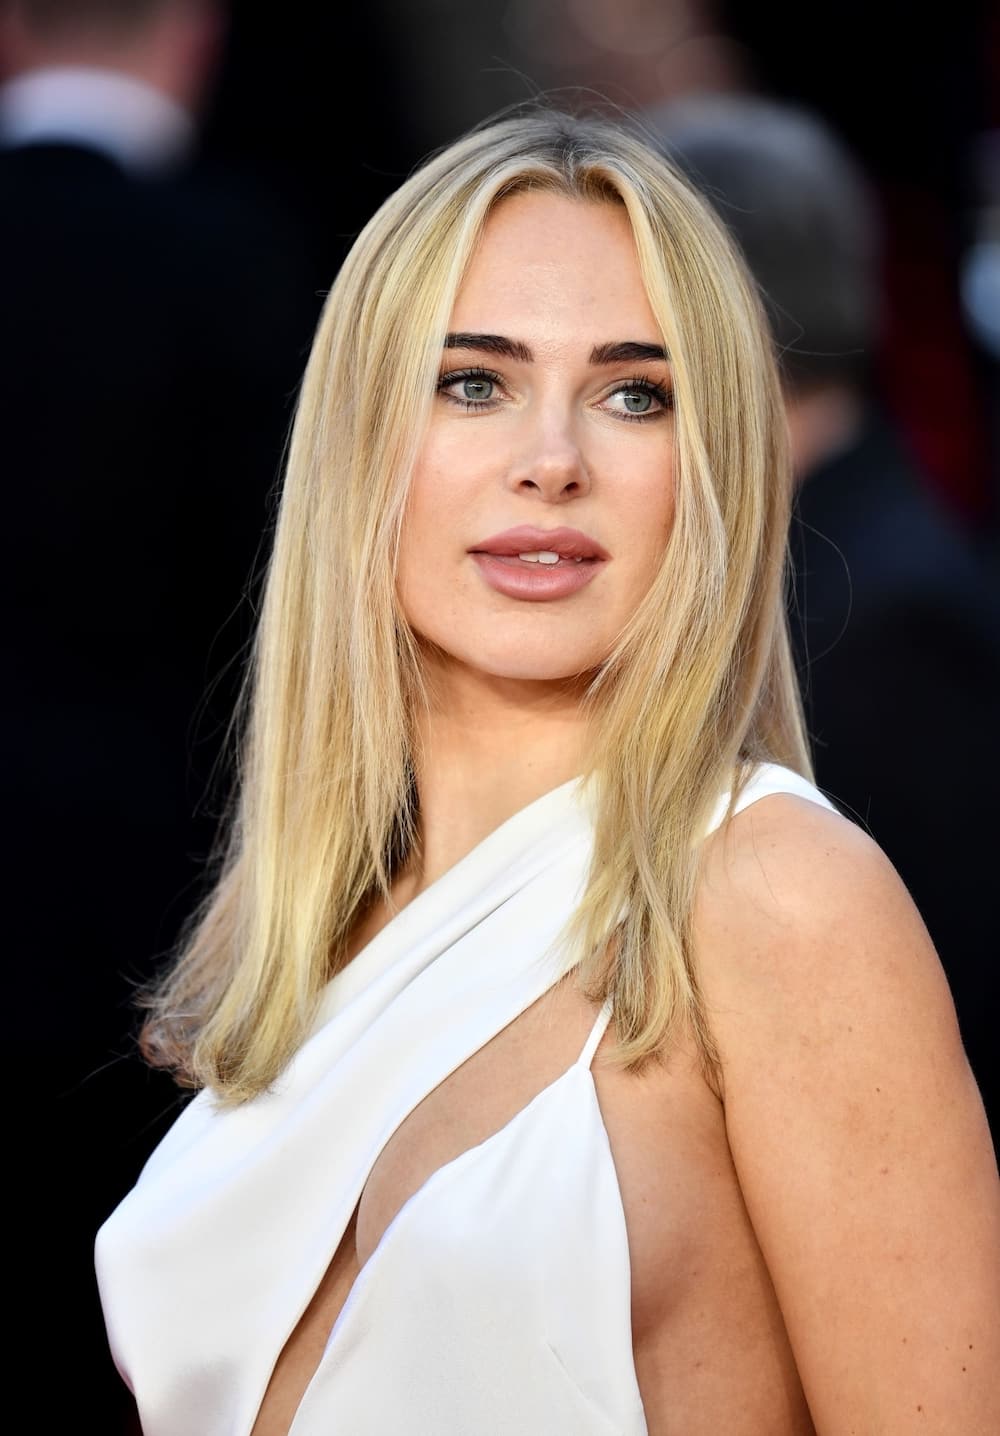 No Time To Die World Premiere: Sensual Kimberley Garner in White Gown